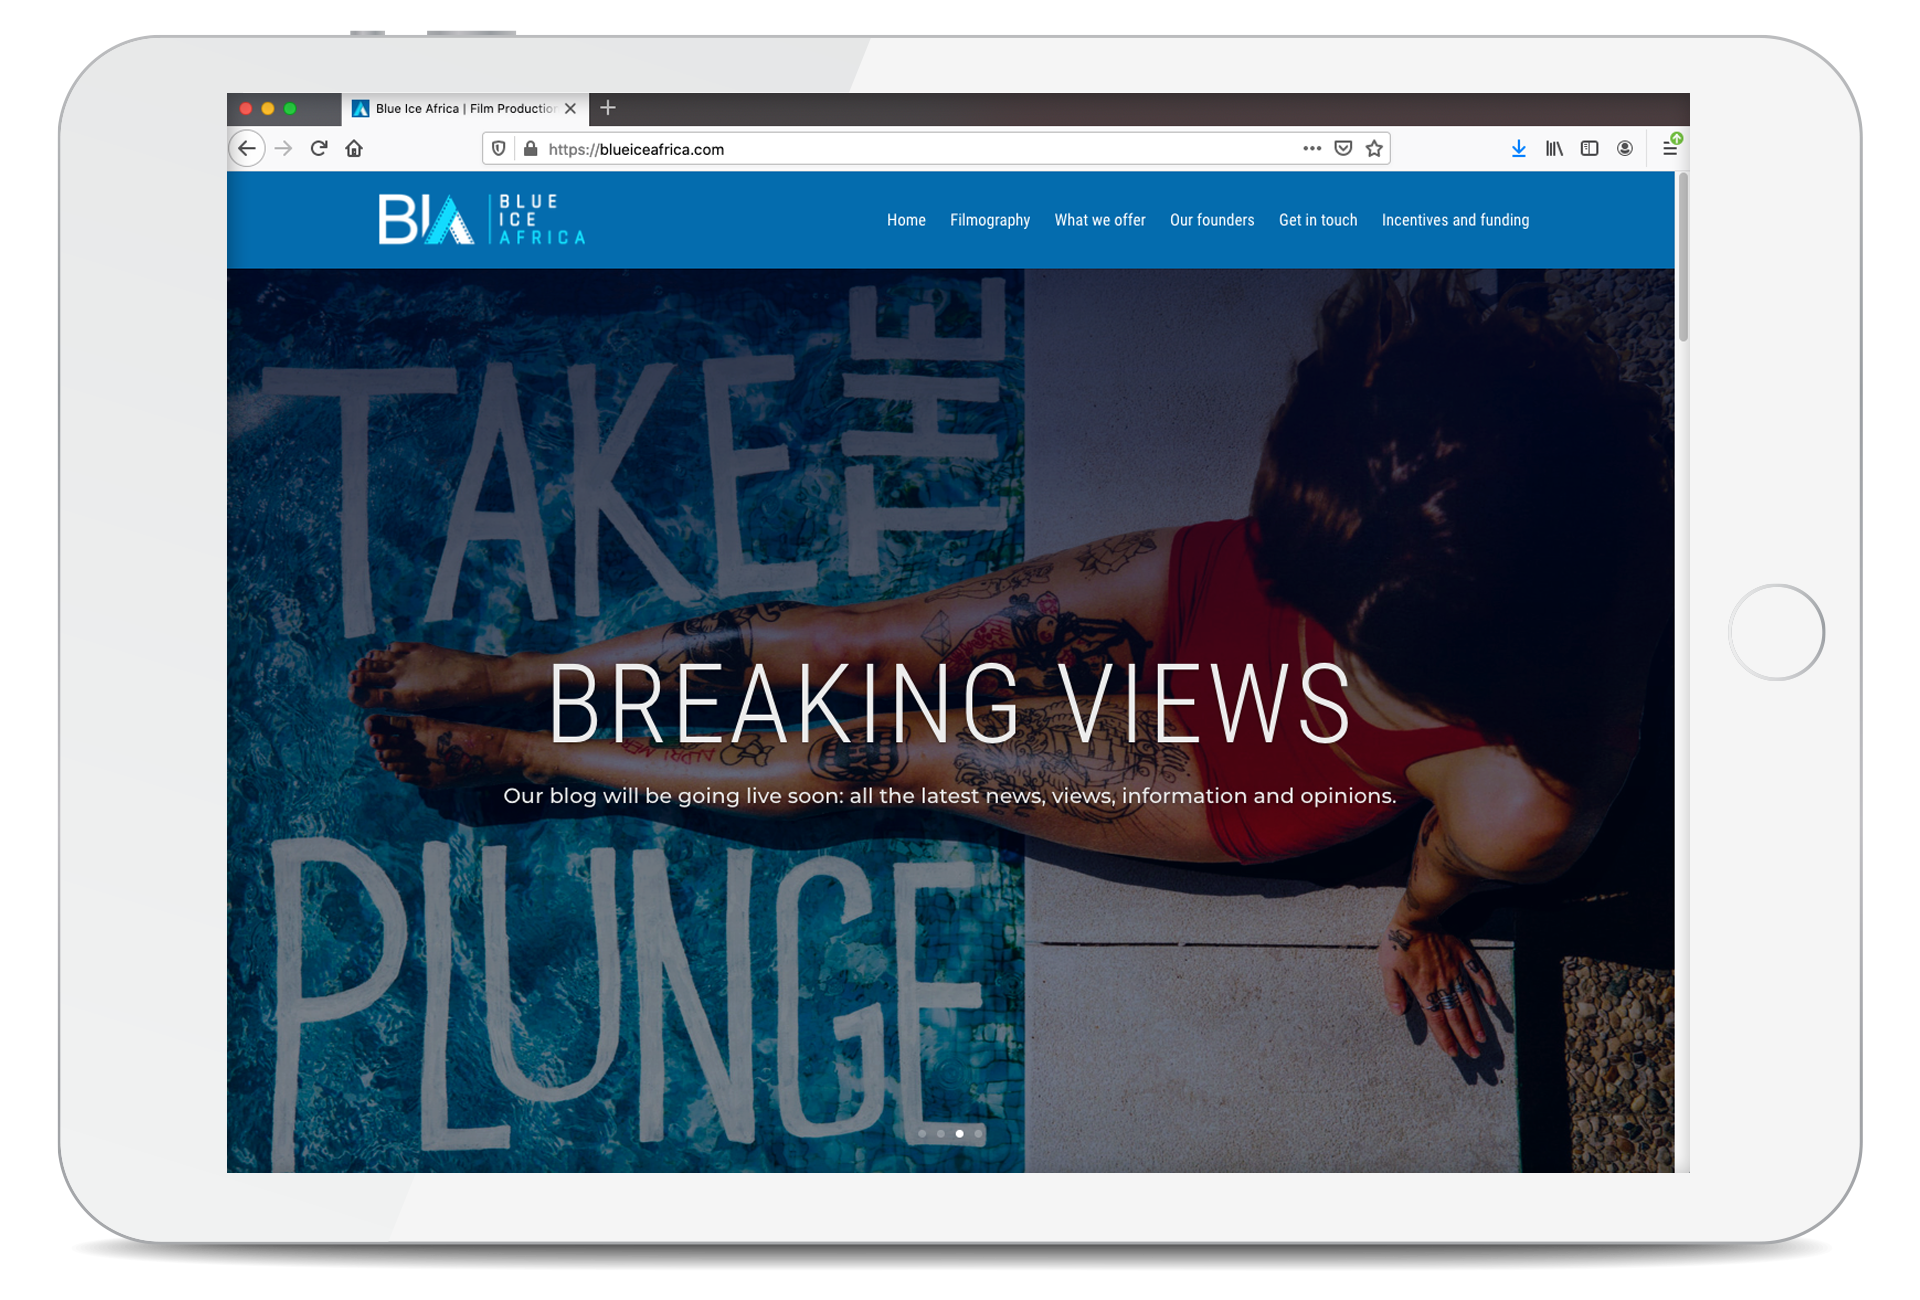 Blue Ice Africa: typical website page, designed by MR.SMiTH